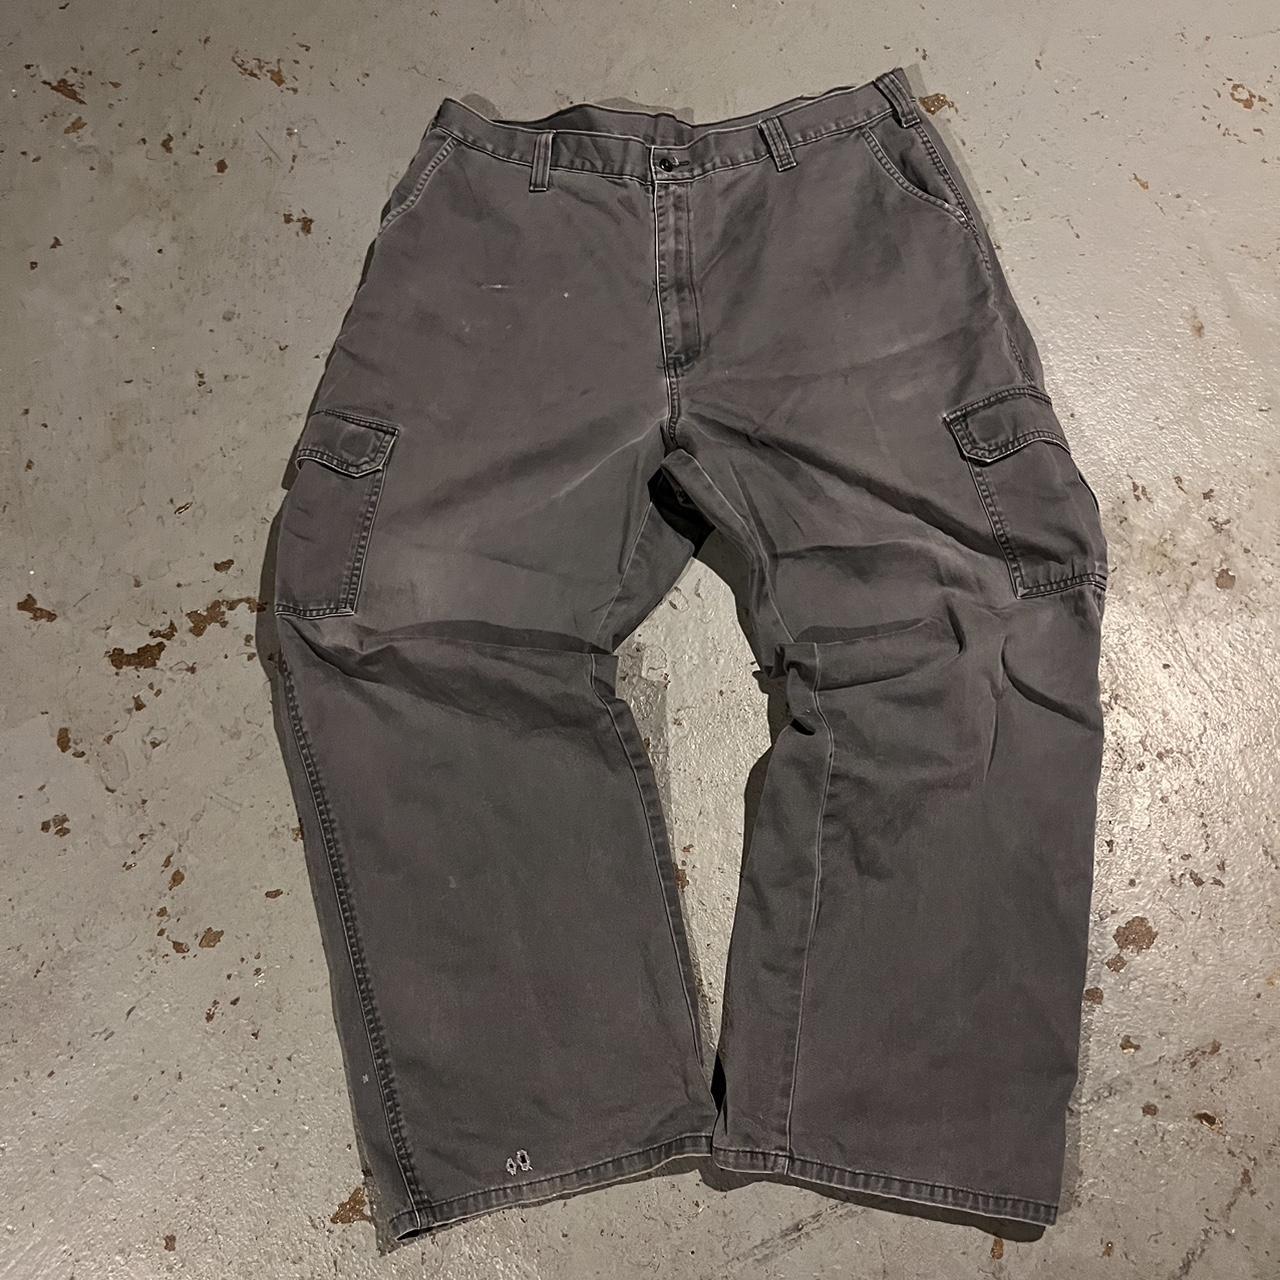 BAGGY JNCO STYLE CARGO DICKIE PANT Pretty Good... - Depop